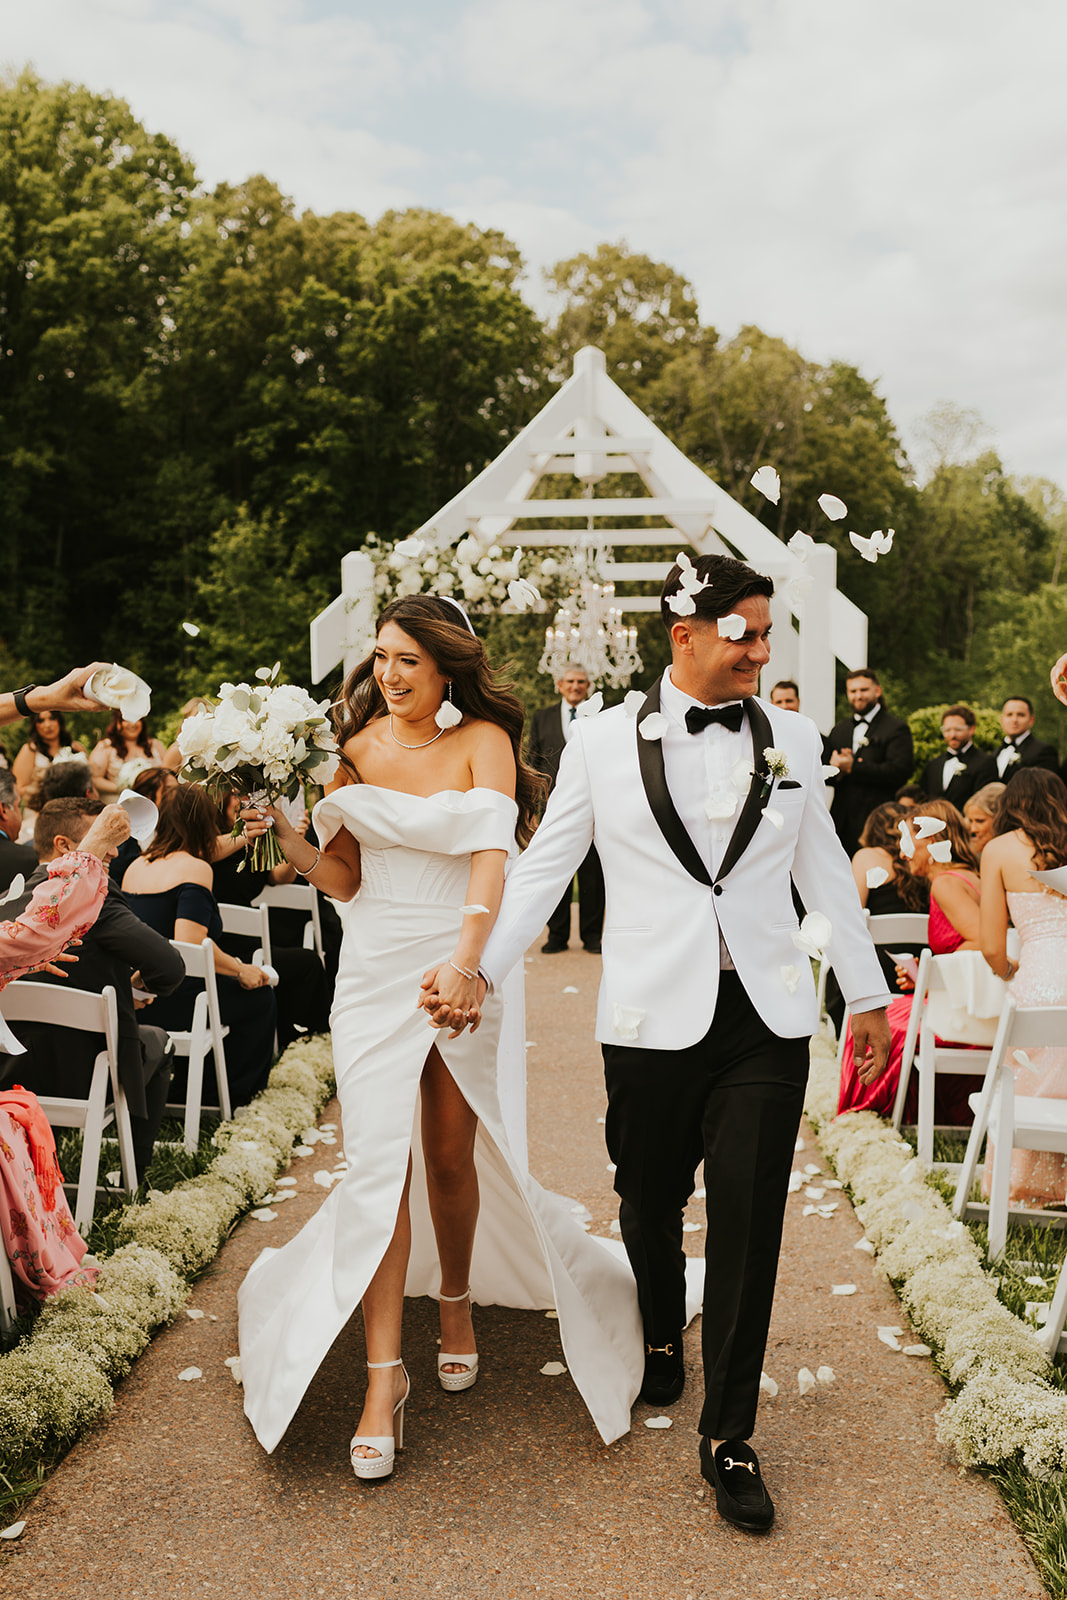 Bride and Groom celebrate as they walk down the aisle after saying "I do"